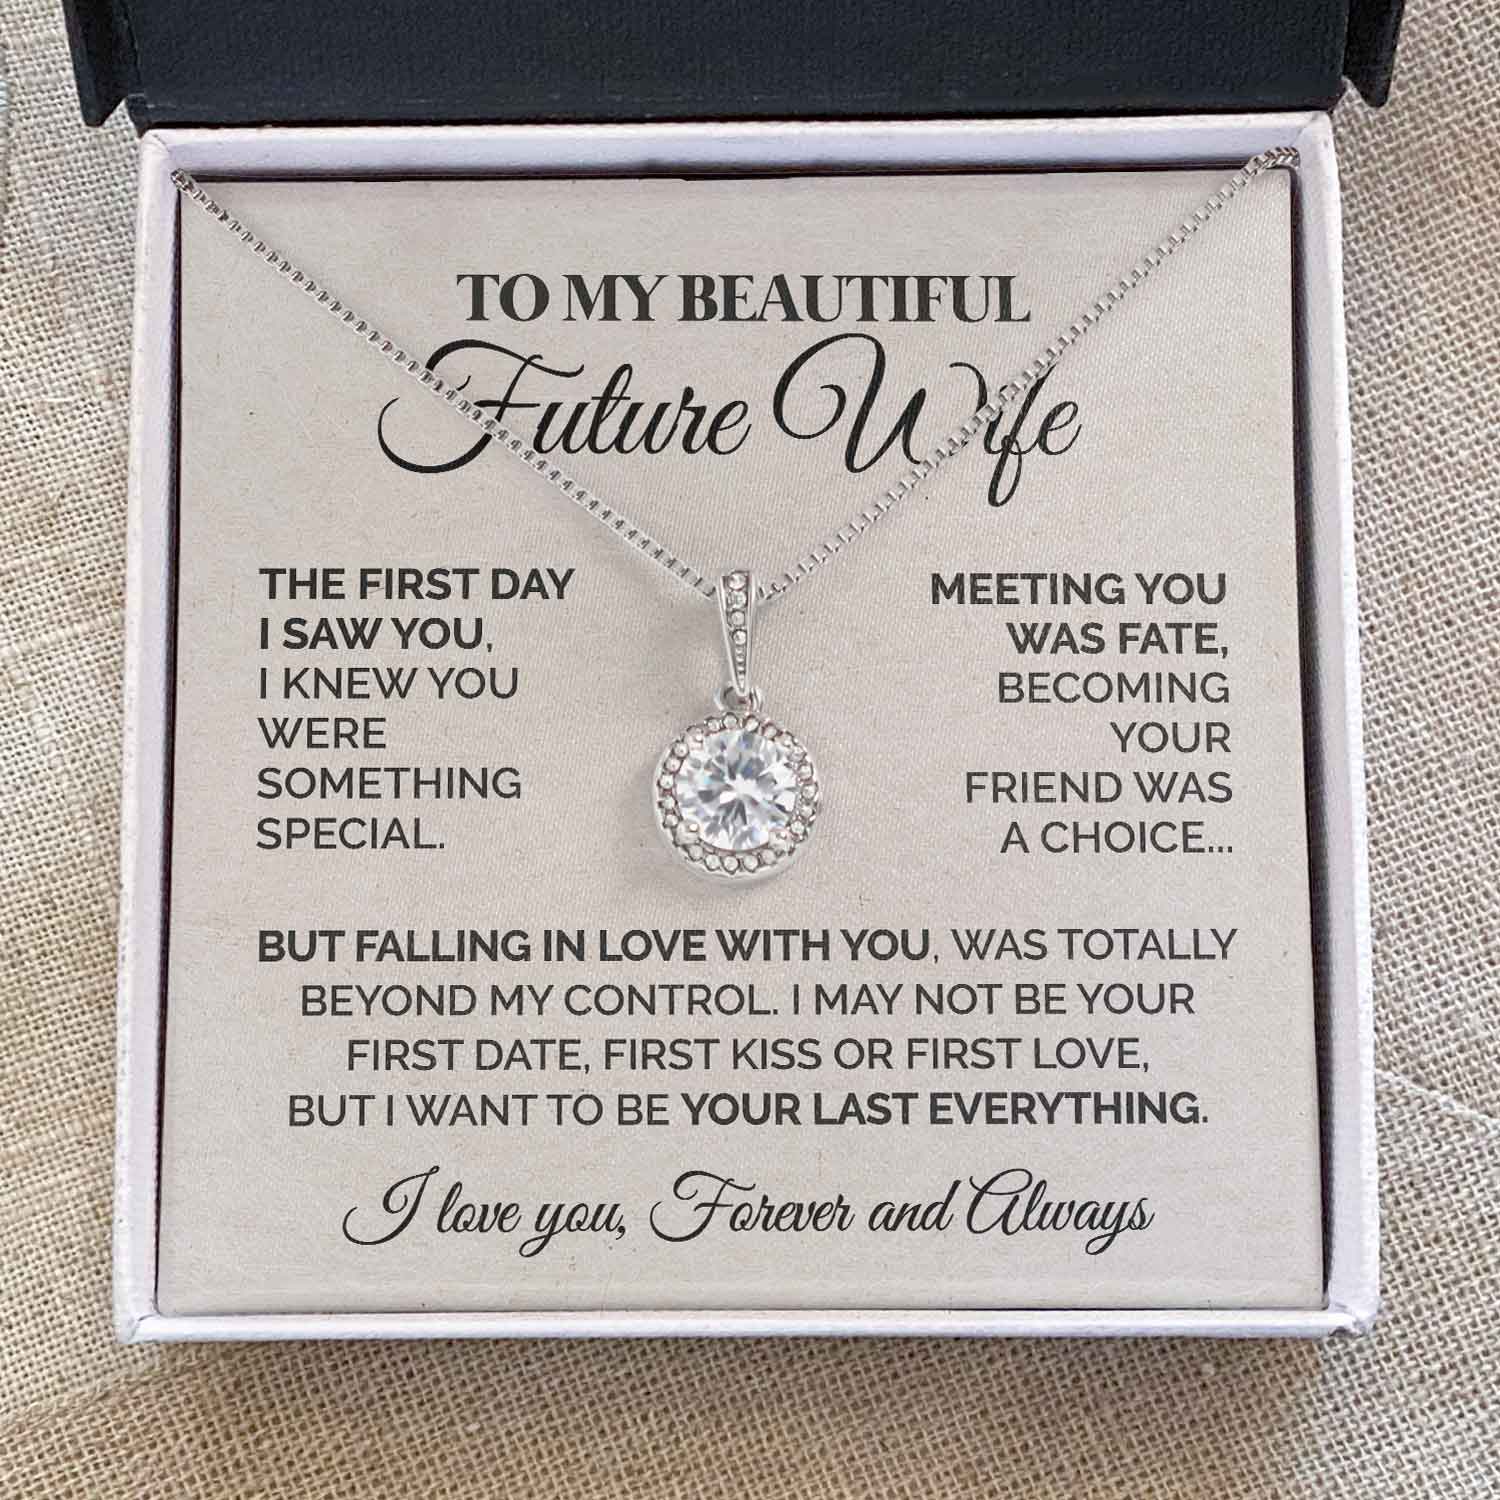 ShineOn Fulfillment Jewelry Mahogany Style Luxury Box To My Beautiful Future Wife - The First Day I Saw You - Eternal Hope Necklace